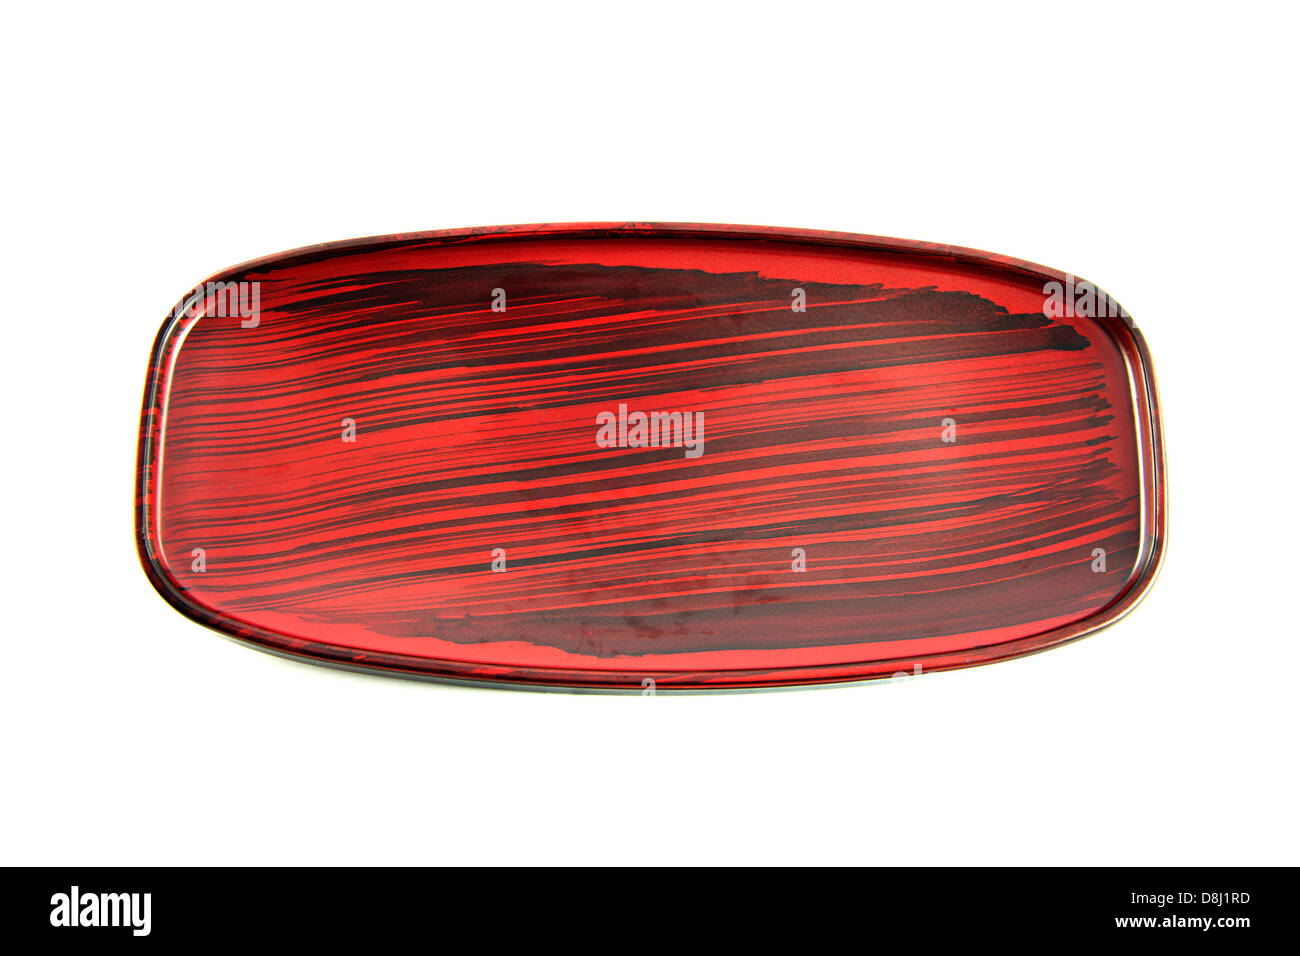 The dish on the white background,It a Wood dishes. Stock Photo